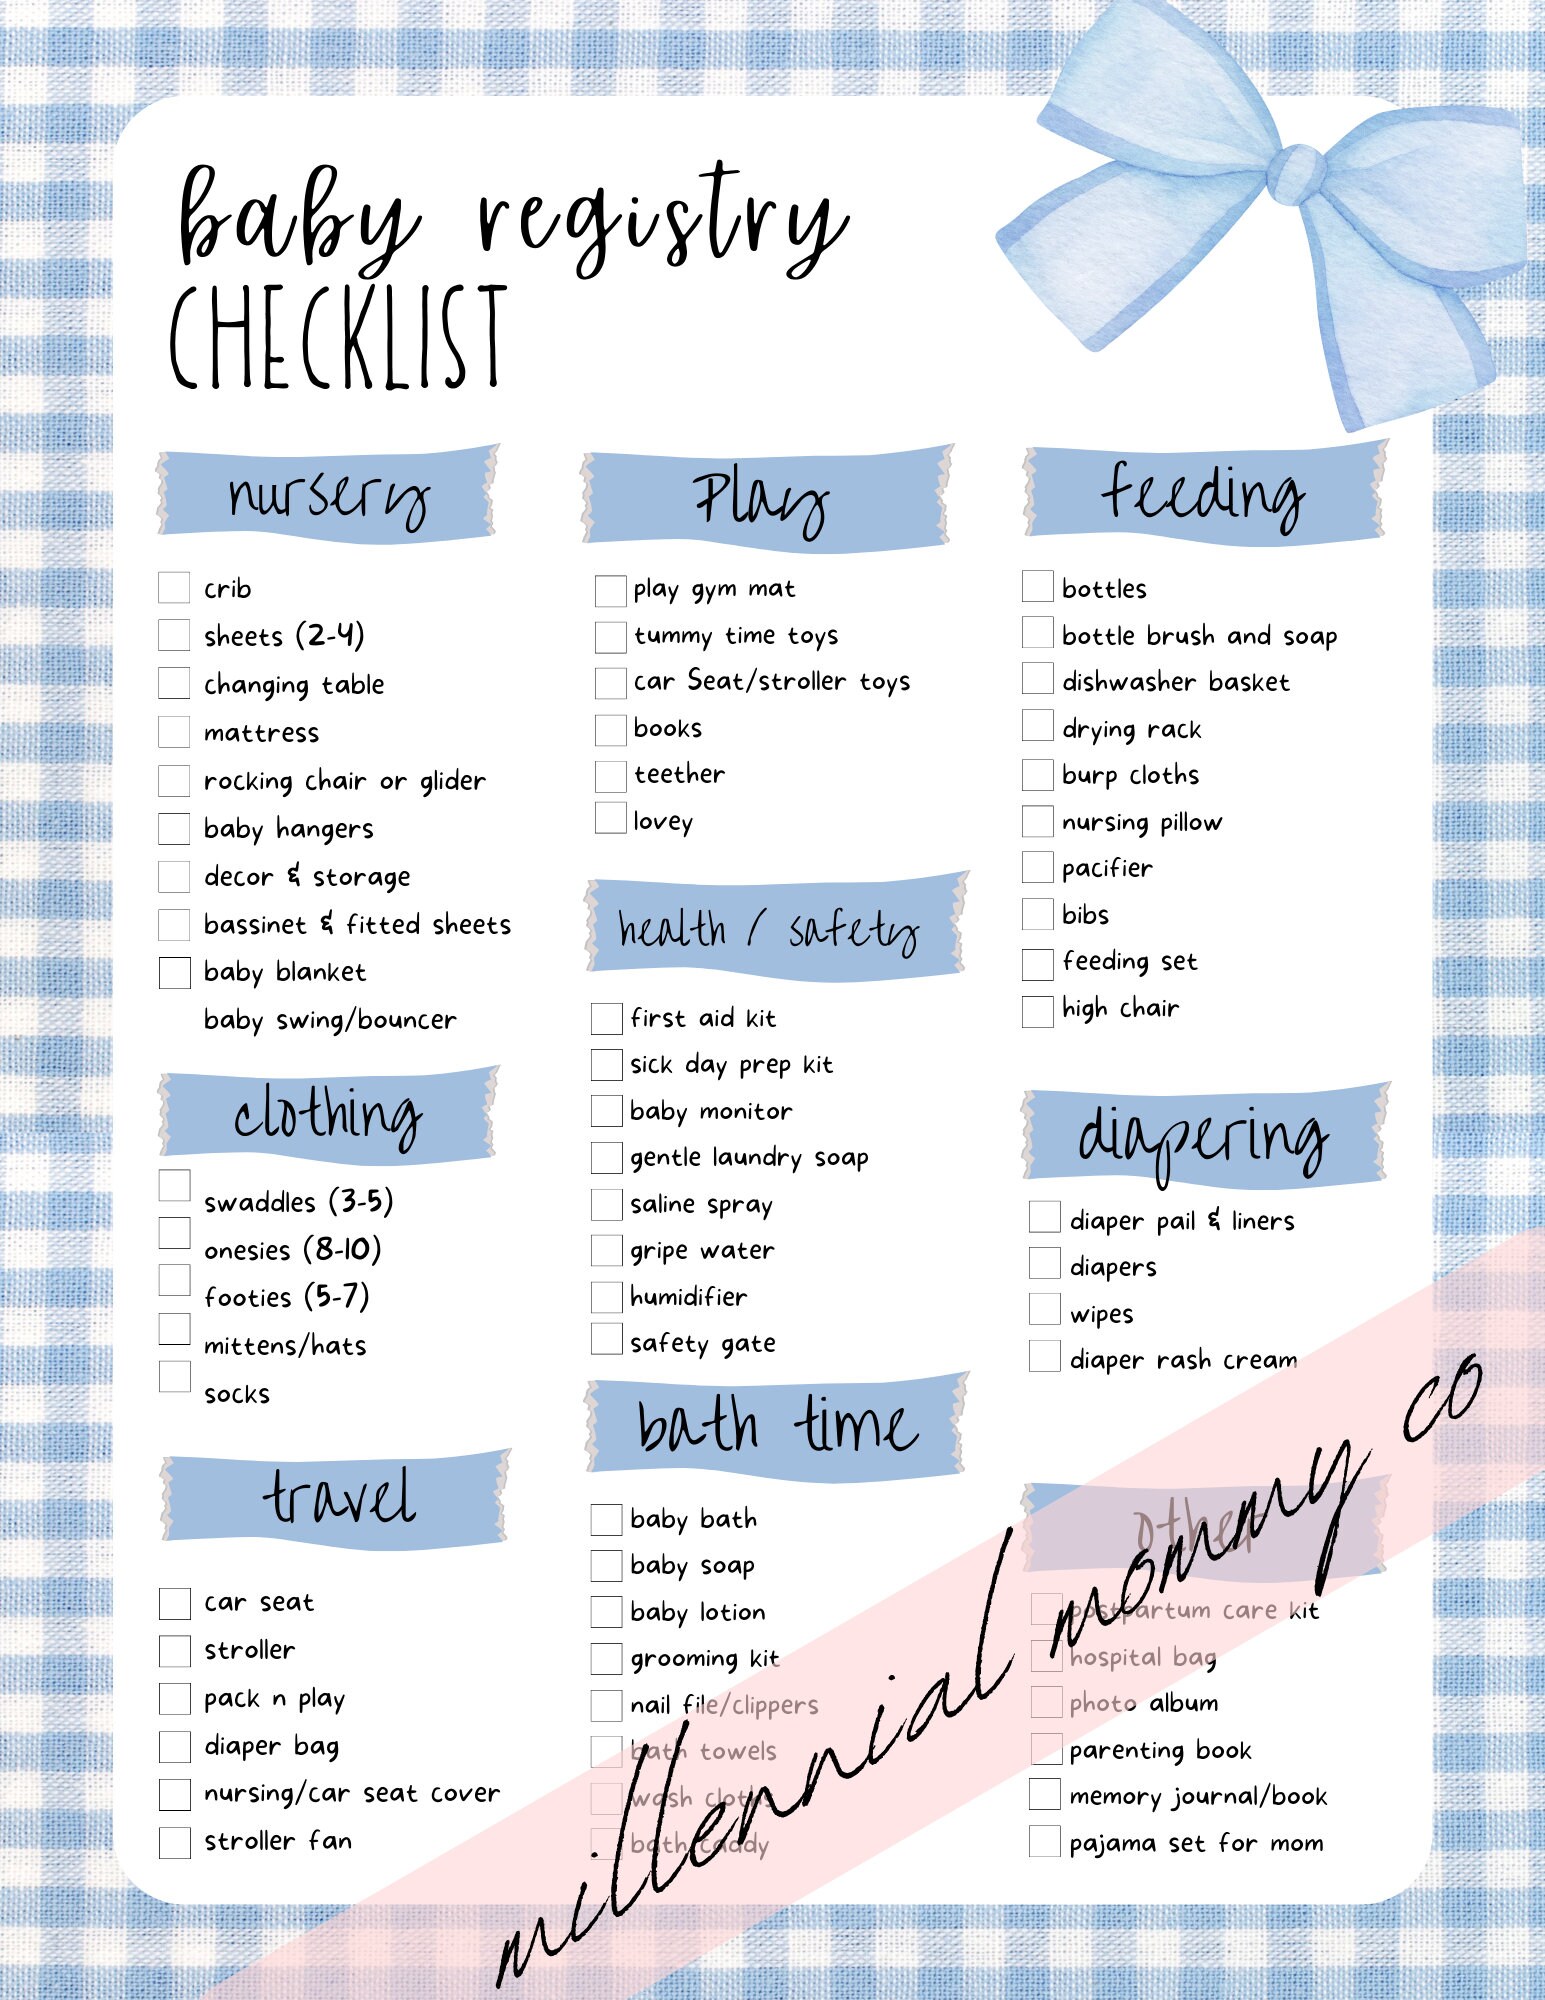 Baby Registry Checklist for First Time Moms - Polished Closets